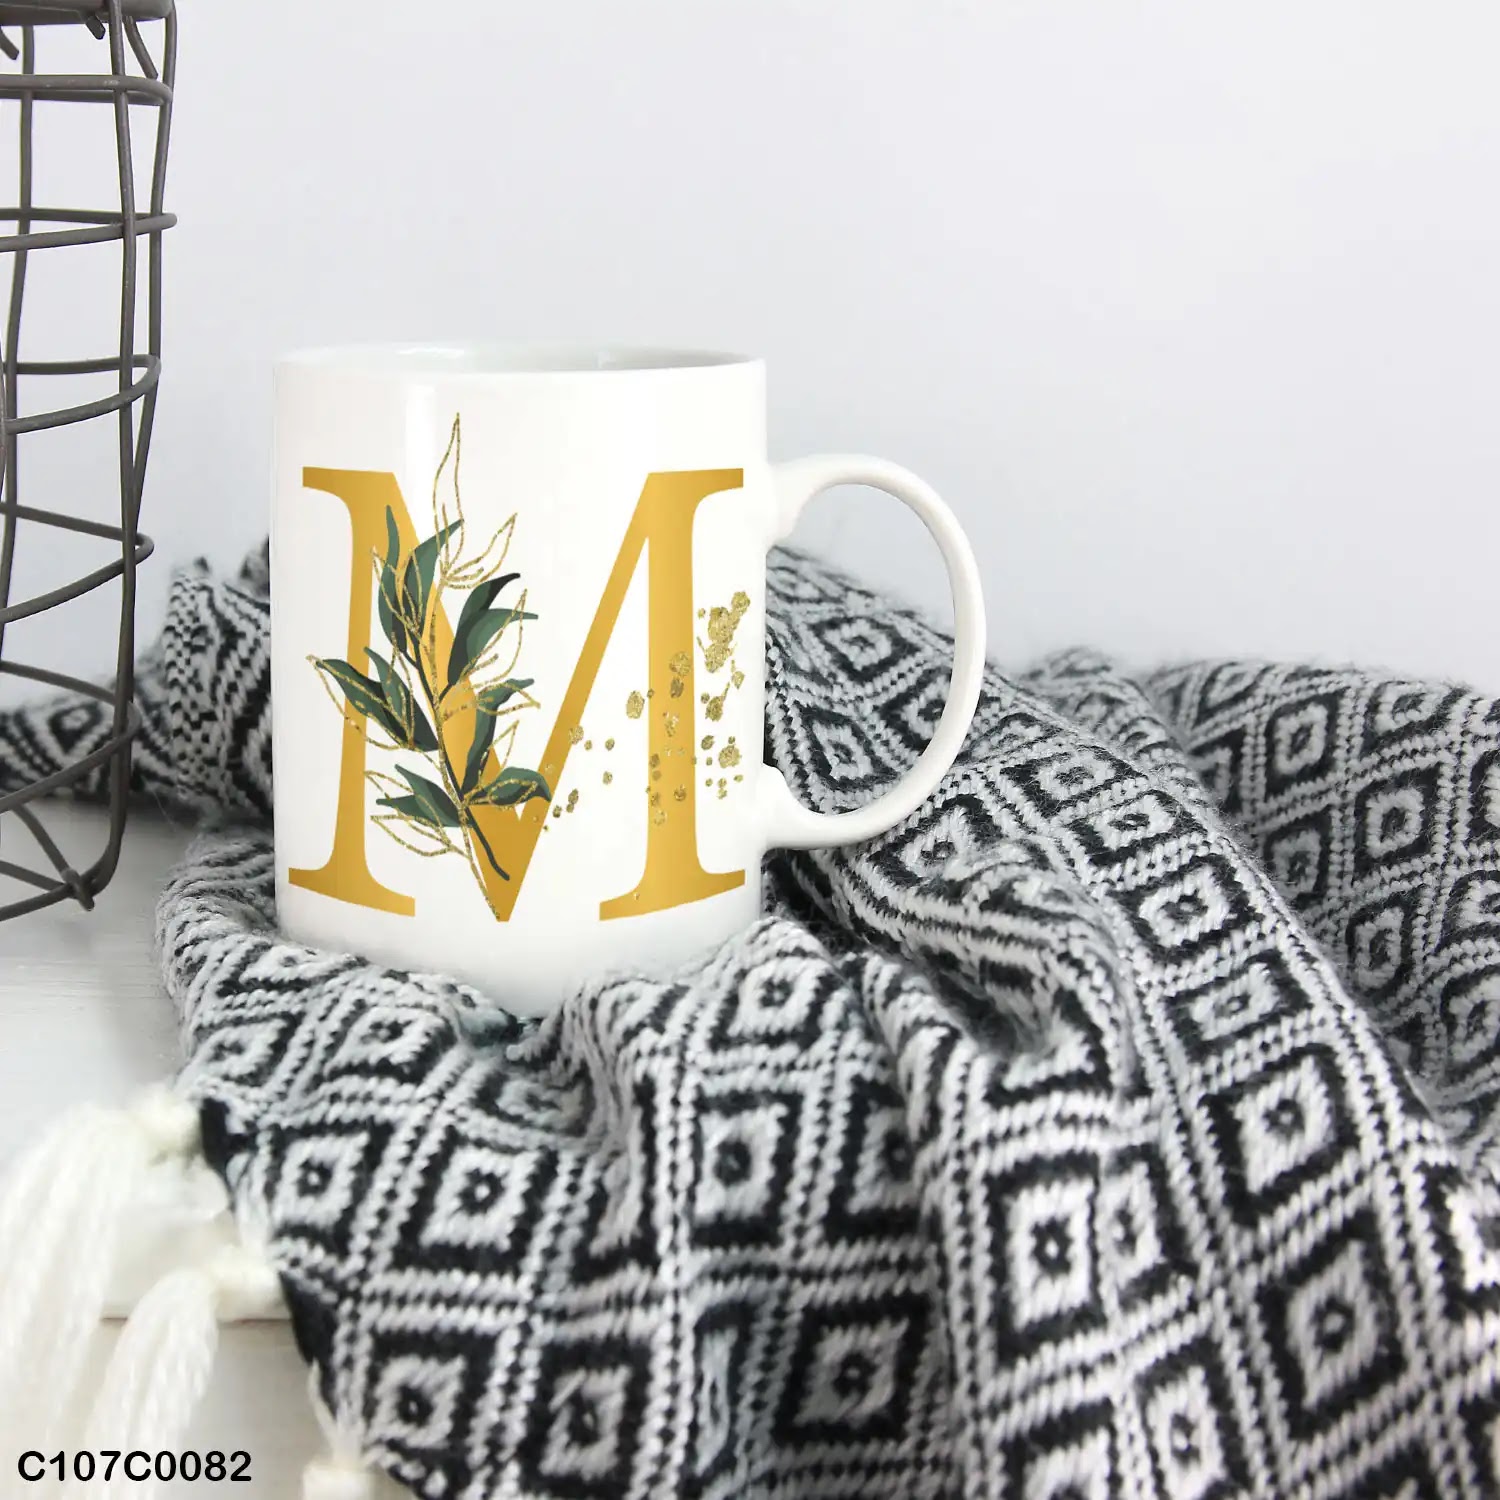 A white mug (cup) printed with gold Letter "M" and small green branch